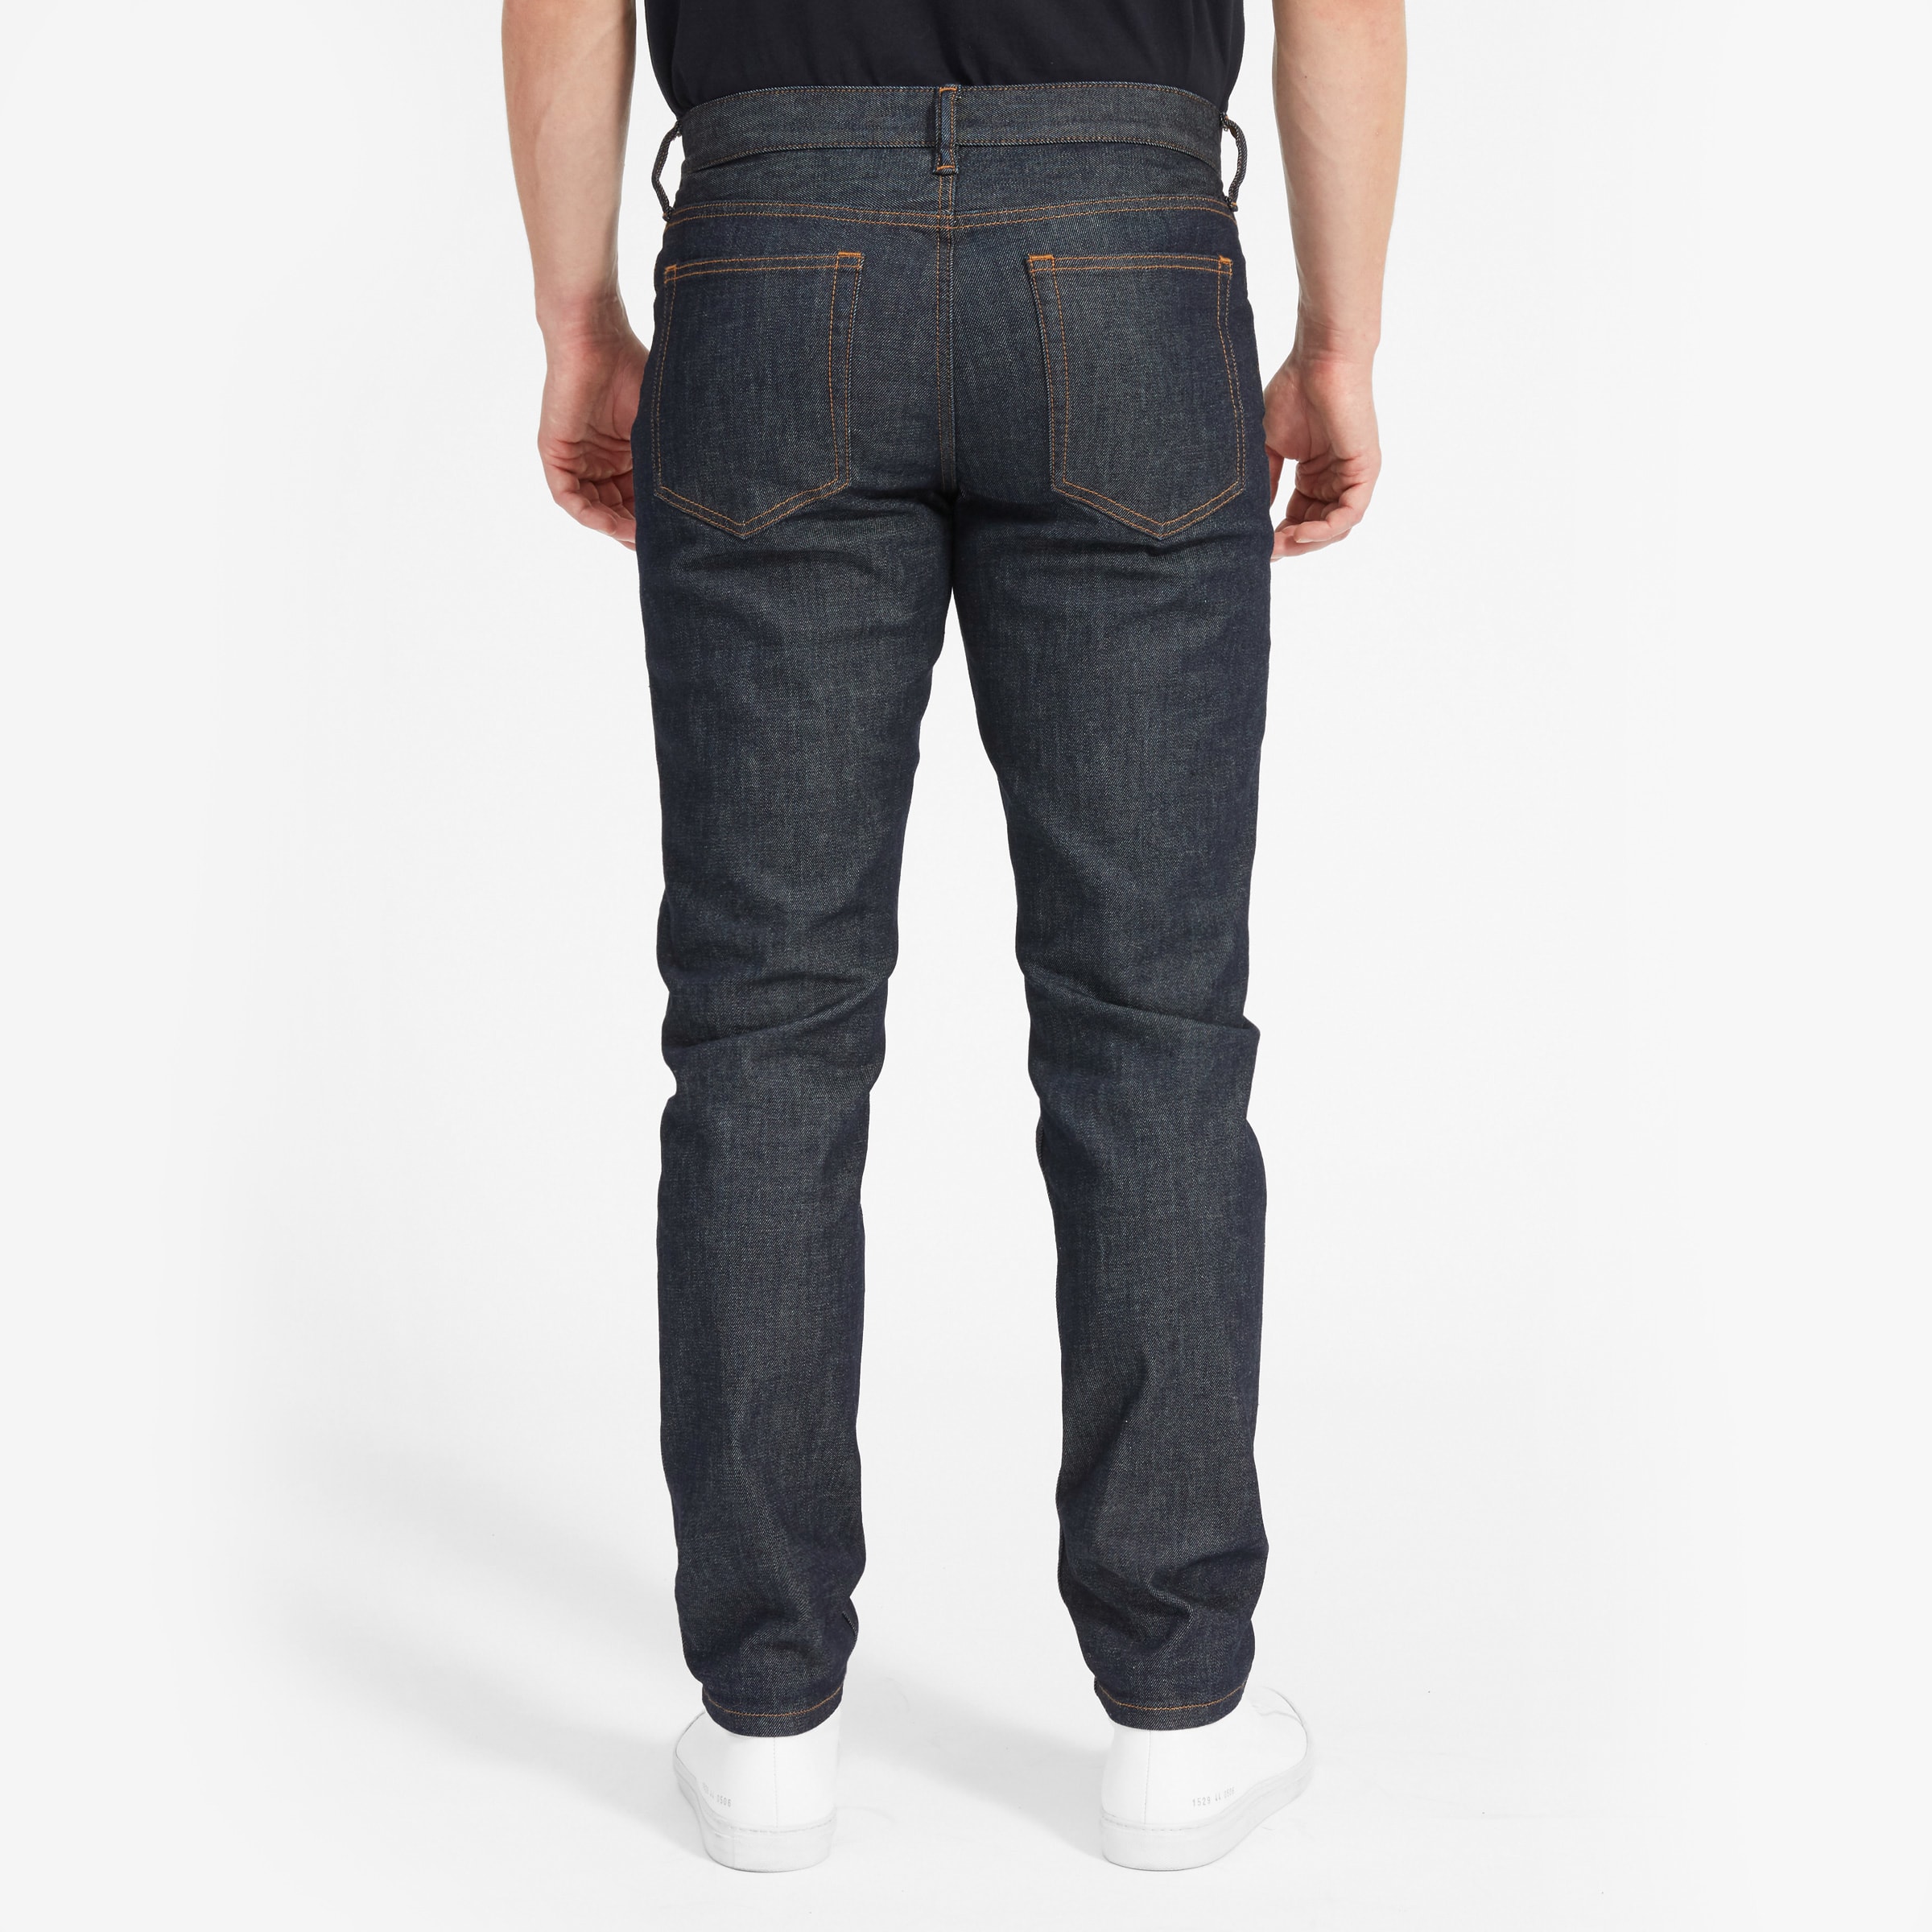 3SIXTY5 Men's 3sixty5 Athletic Fit Jeans